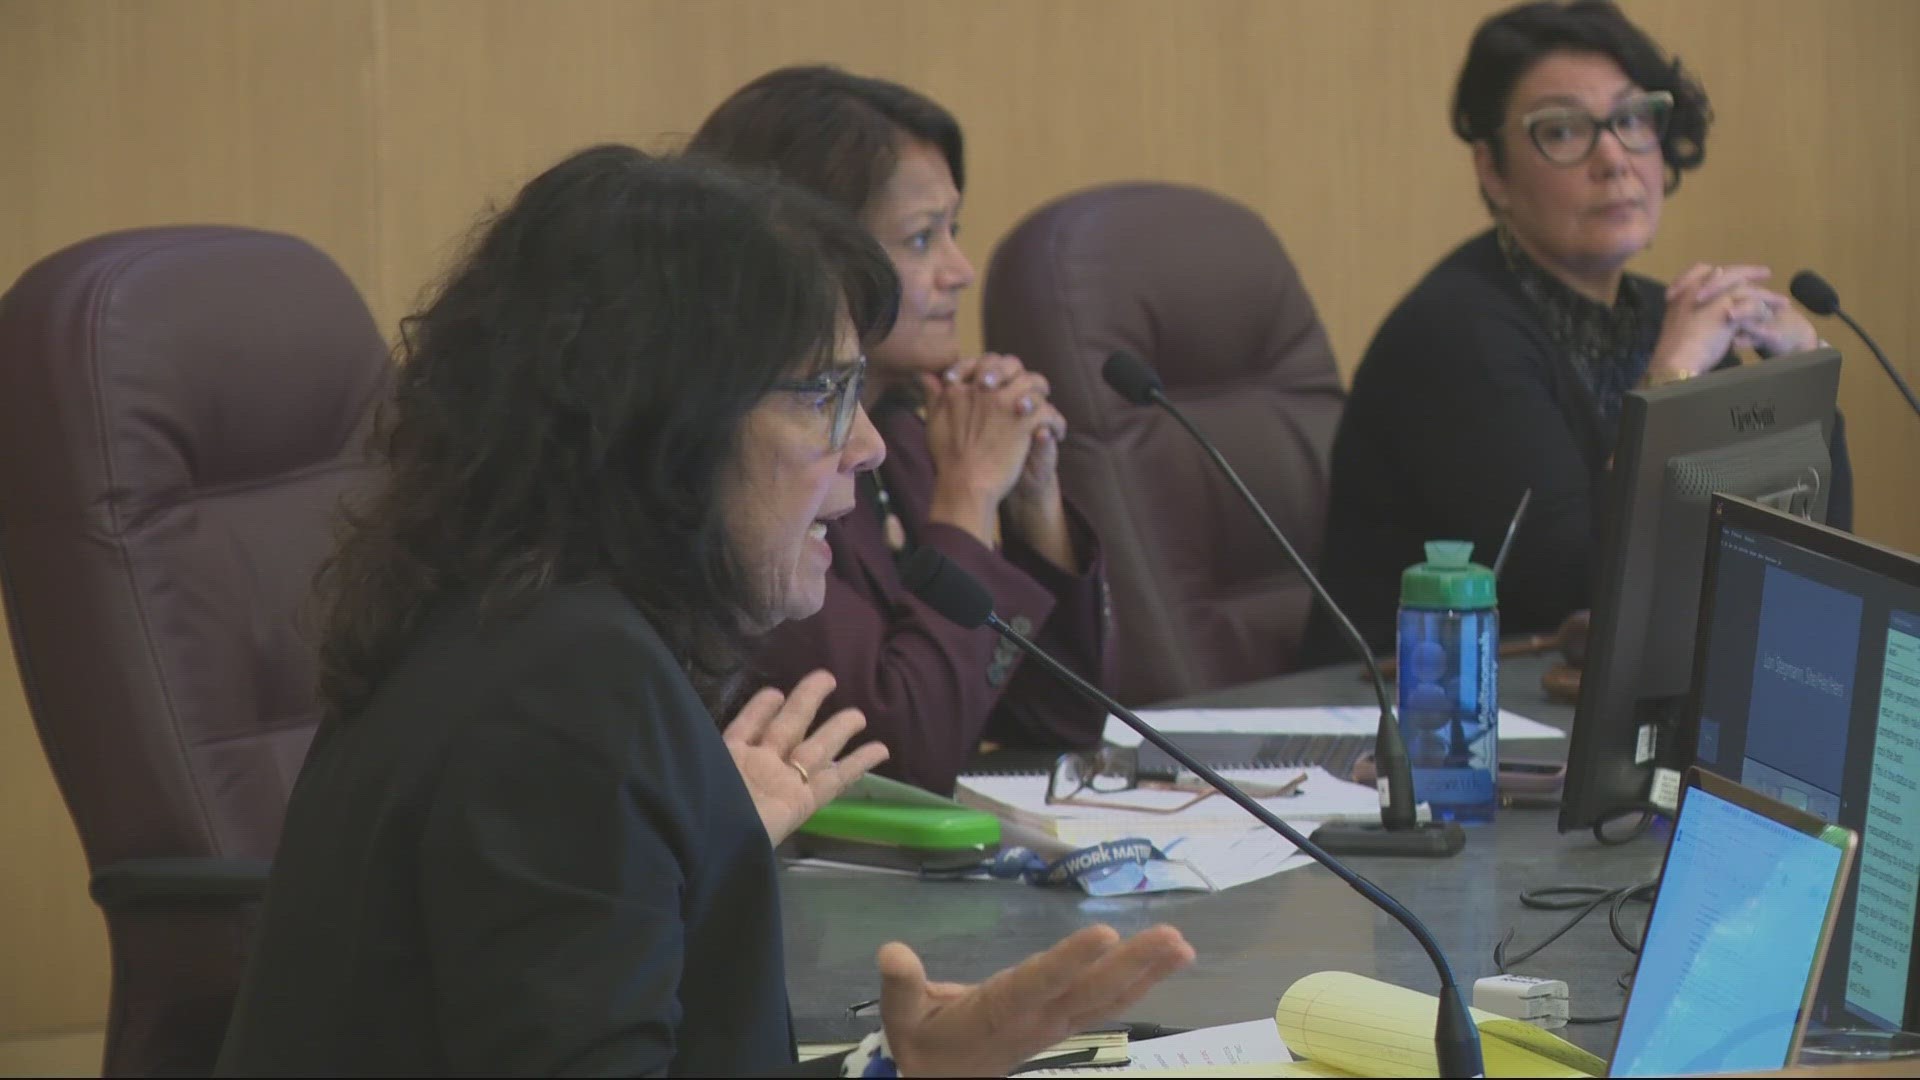 Only Commissioner Sharon Meieran voted against the spending plan, saying it "lacked specifics and cohesion" and didn't fit with a larger plan for homelessness.